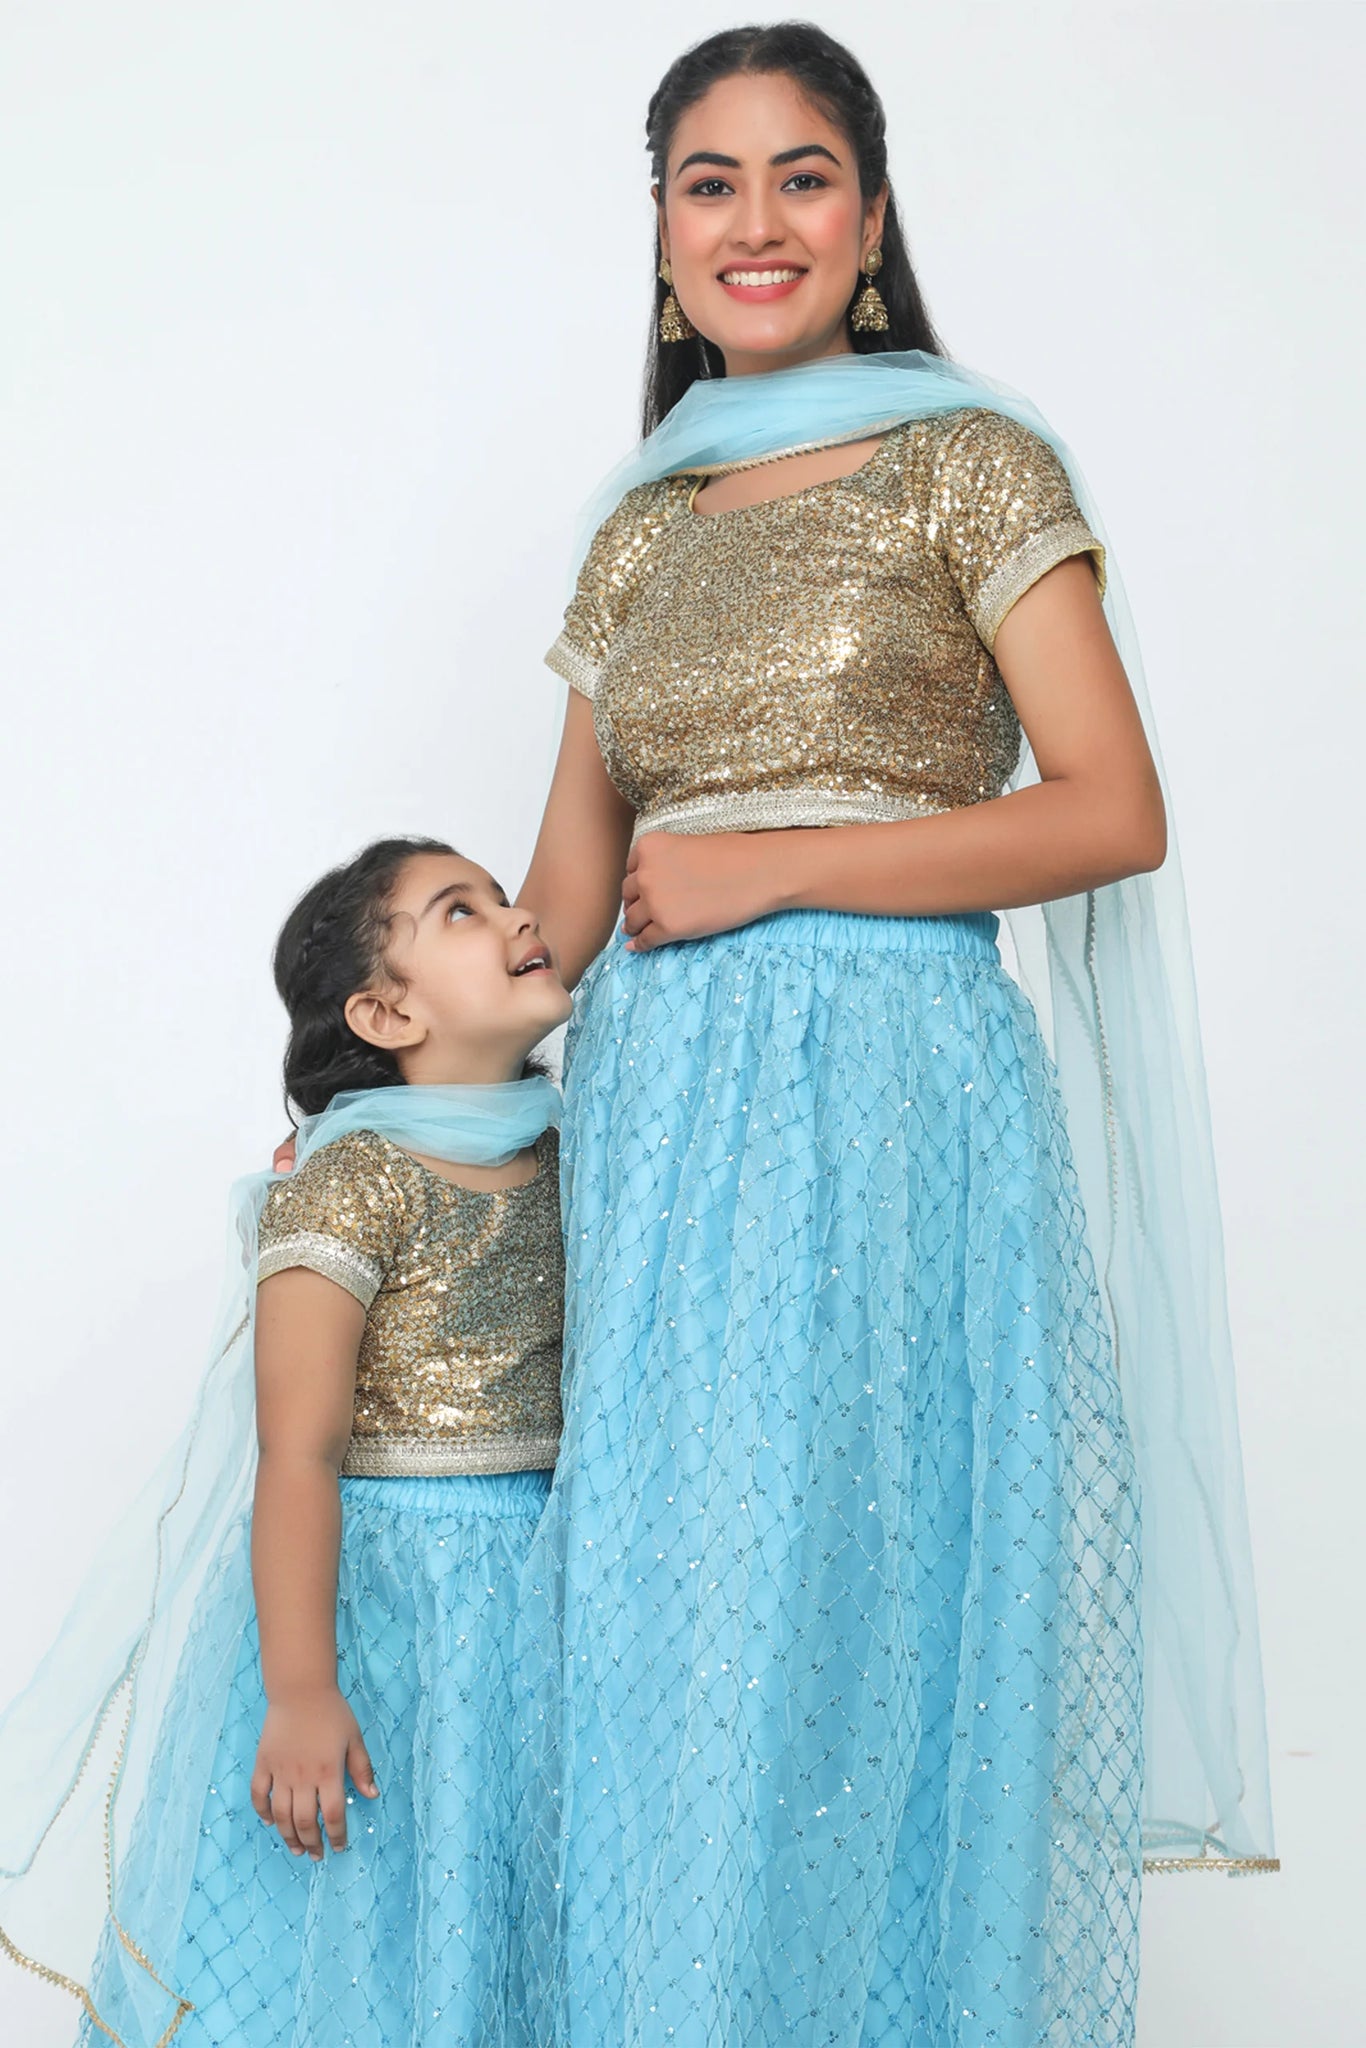 Punarvi - India Authentic|PreLoved|Sustainable Mom and daughter(1-2Y)  ruffle crop top lehenga